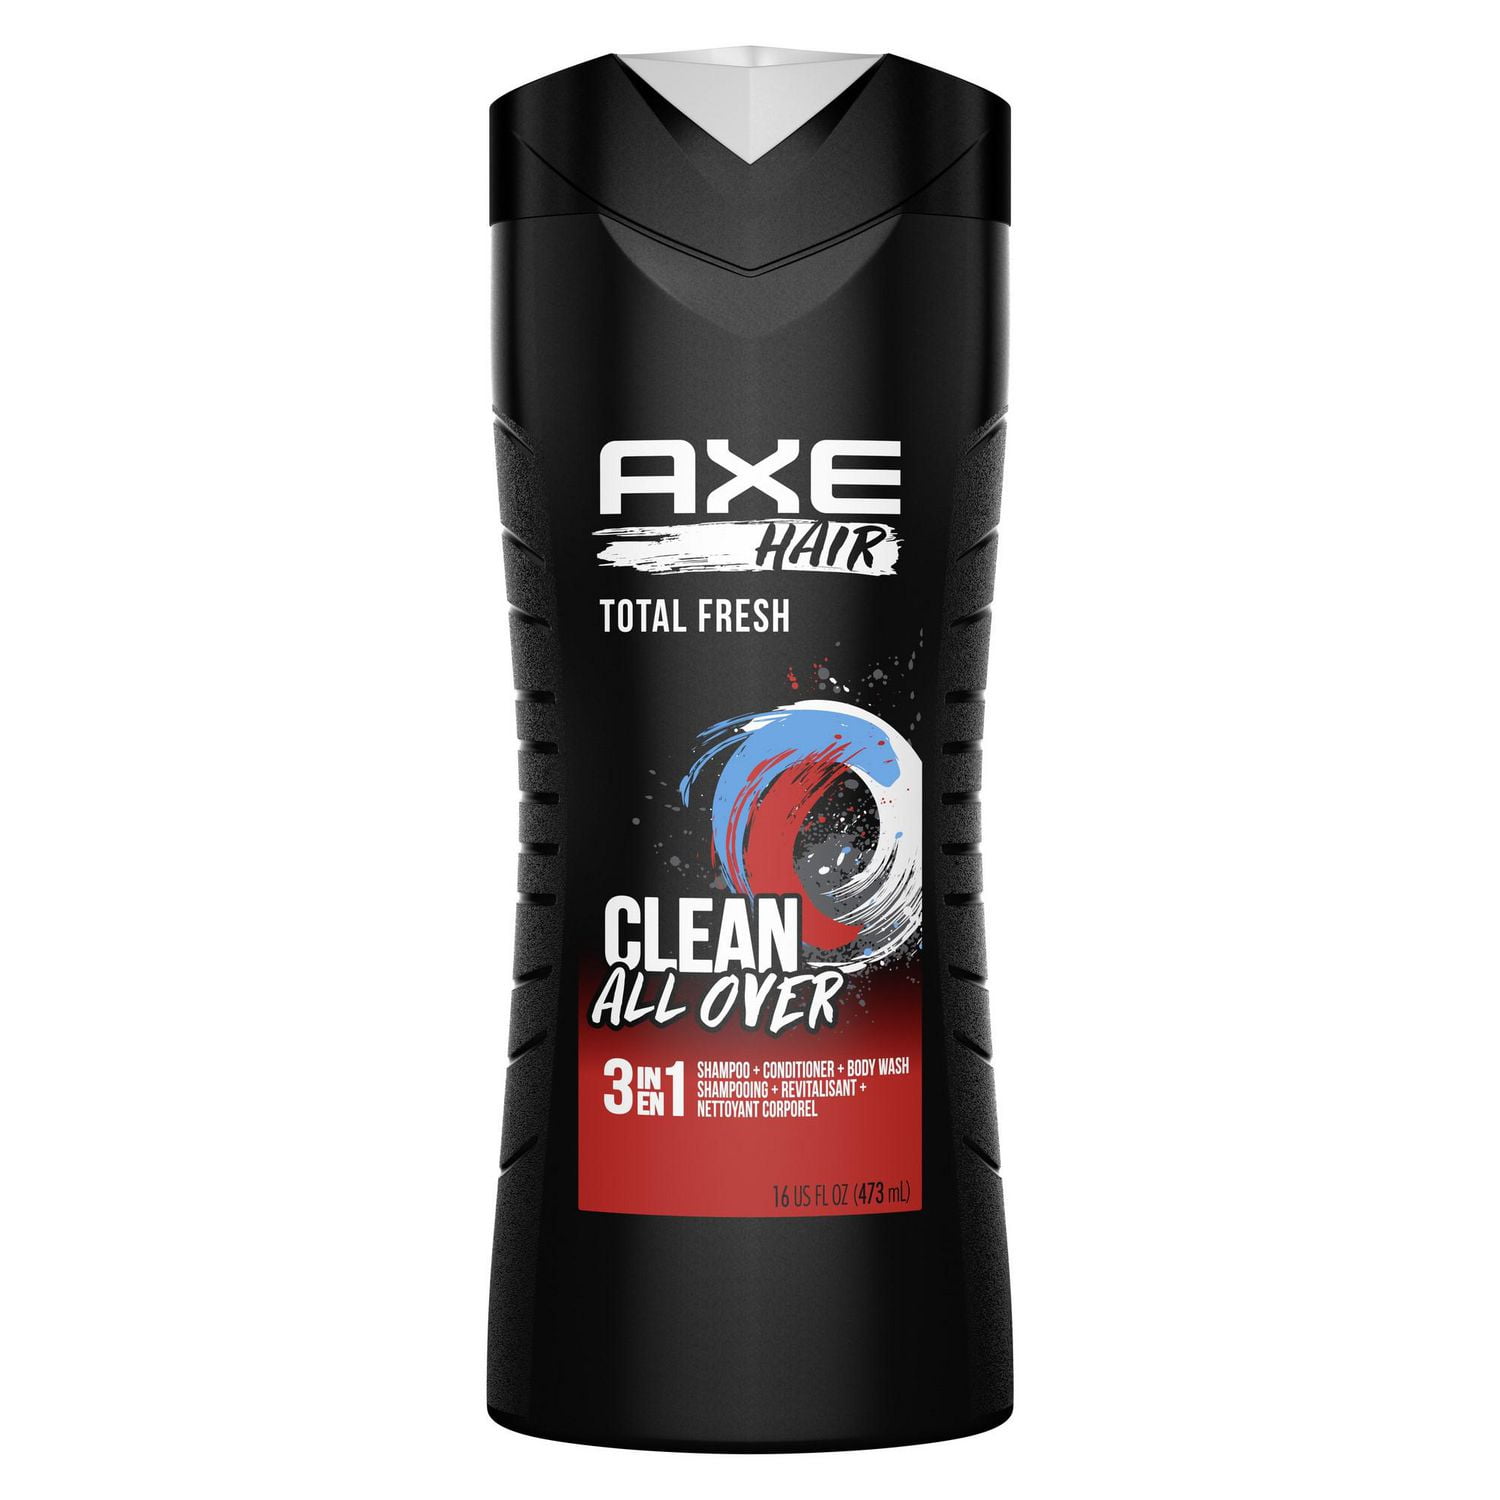 AXE Total Fresh 3 in 1 Shampoo, Conditioner and Body Wash, 473 ml Shampoo 